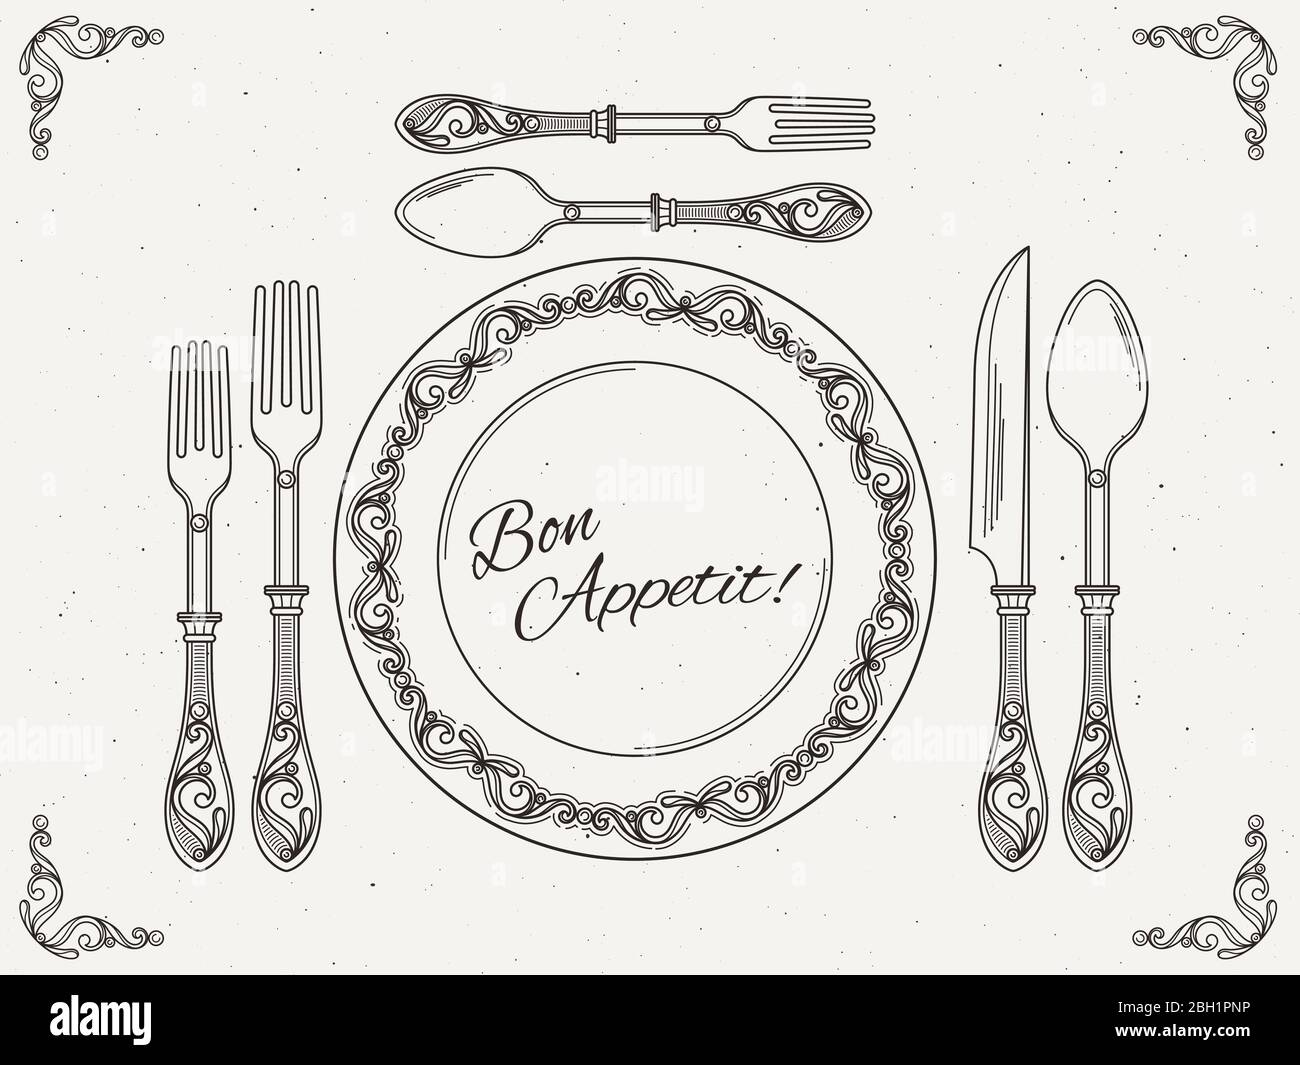 Banquet tableware. Vintage dish with spoon, fork and knife. Symbols of eating on retro vector poster. Knife and spoon, plate and fork illustration Stock Vector